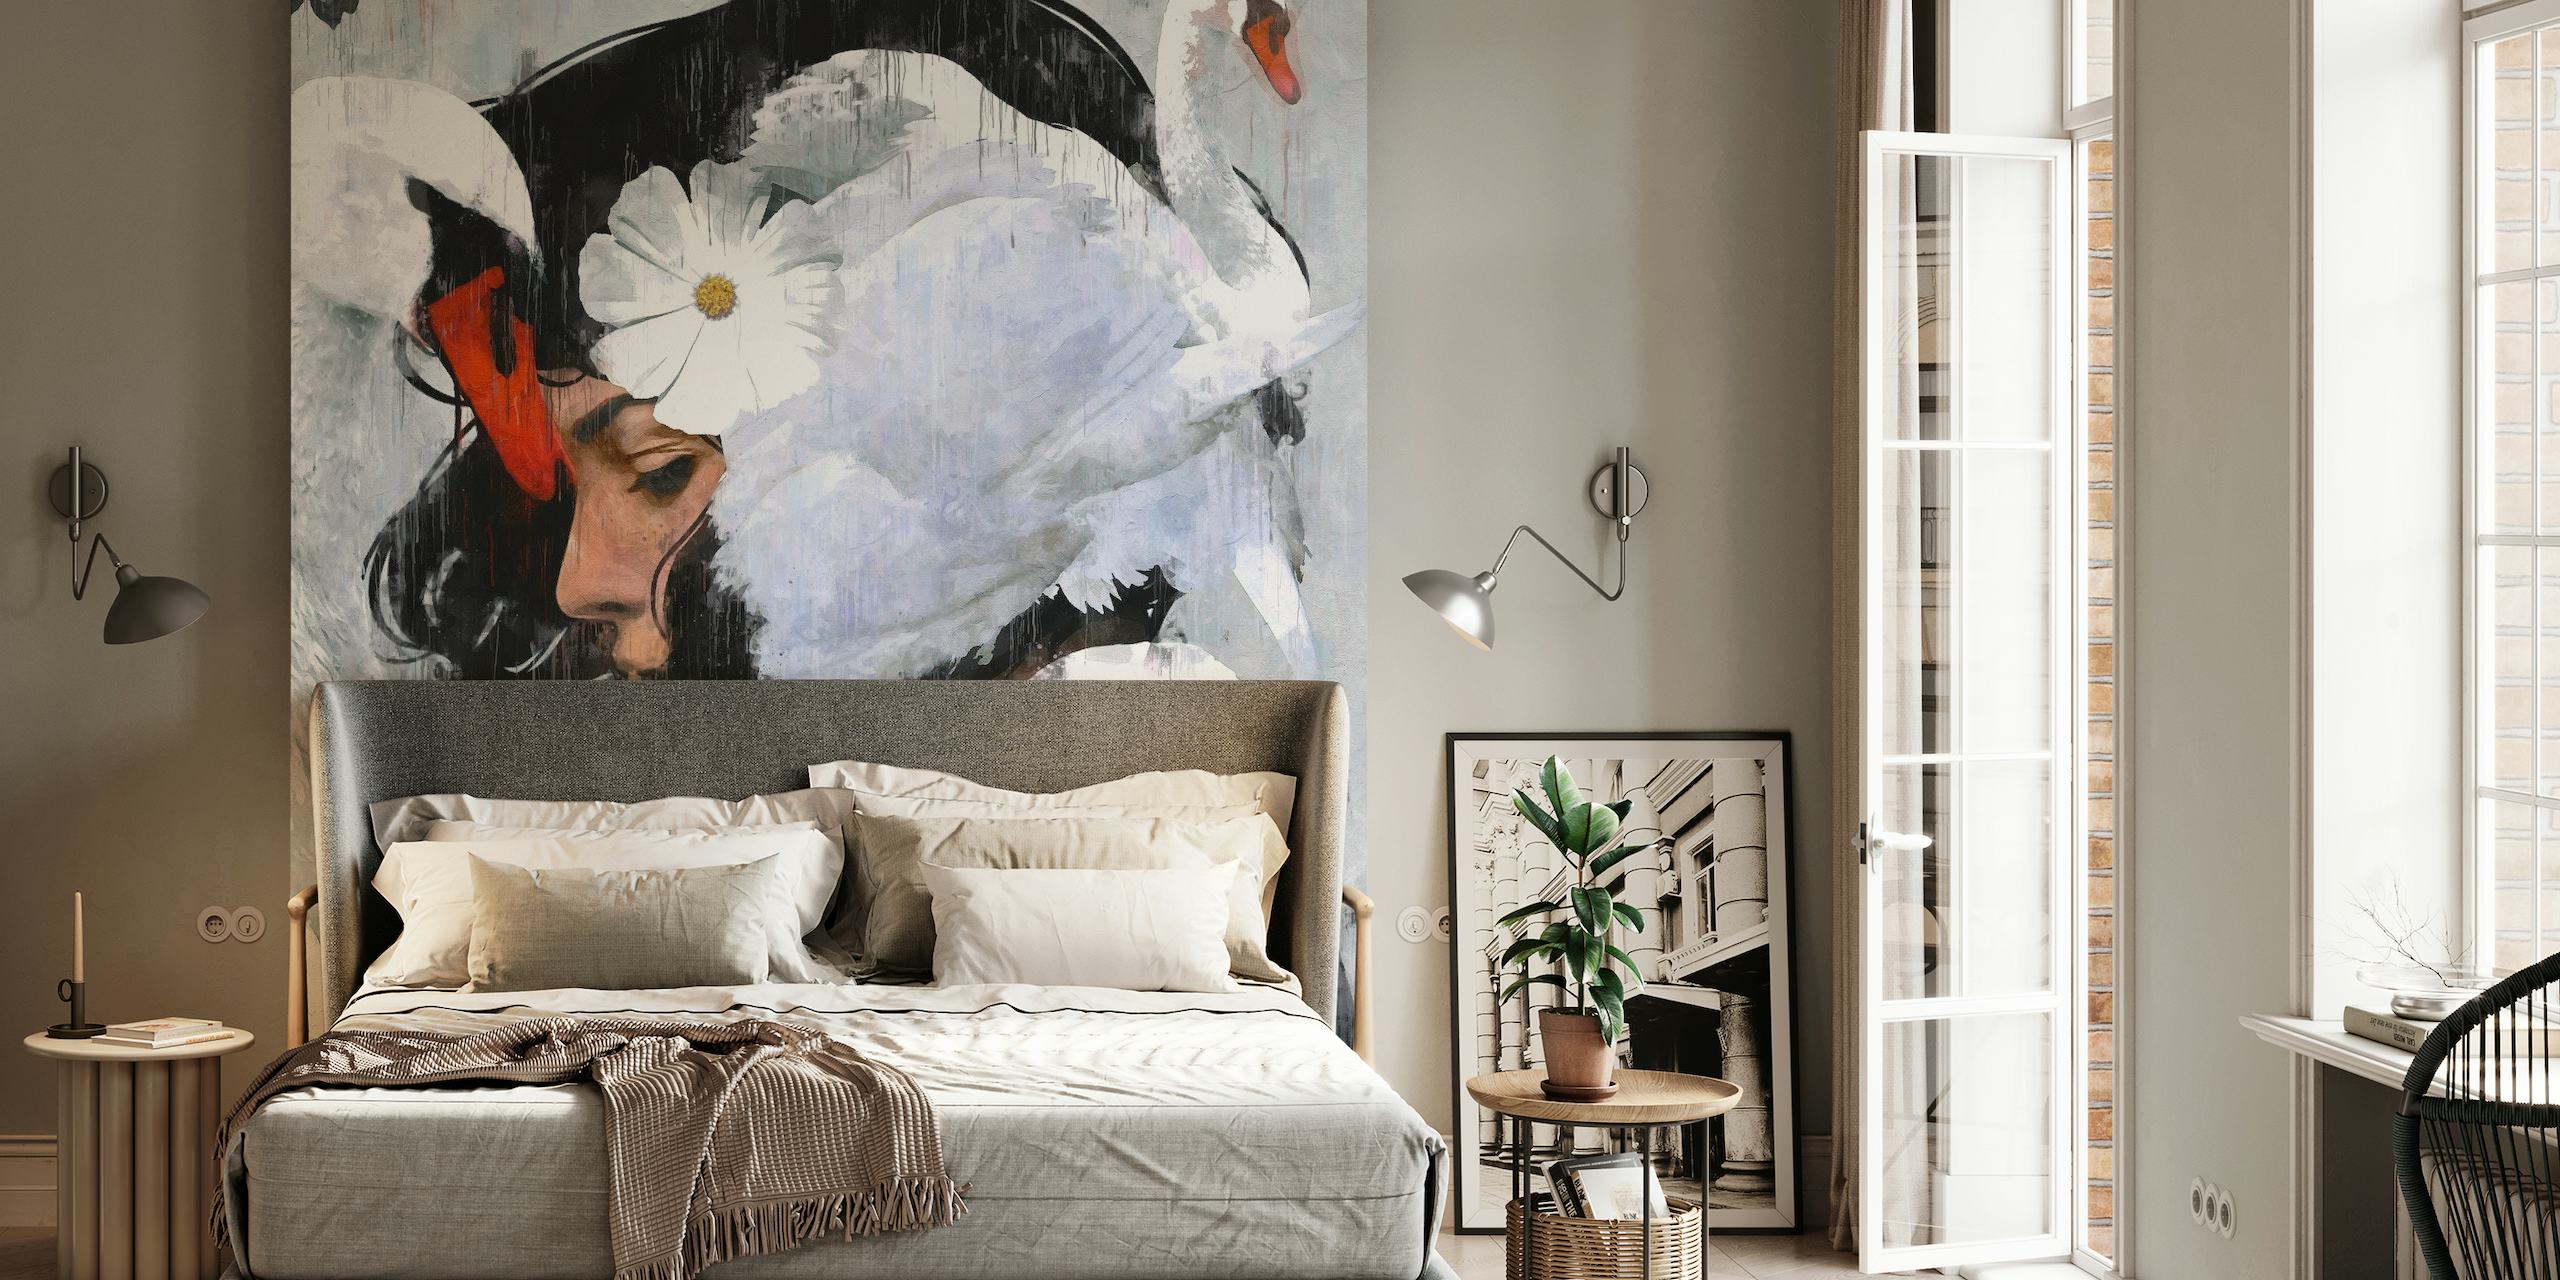 Artistic wall mural of a person merged with a white swan against a grey canvas